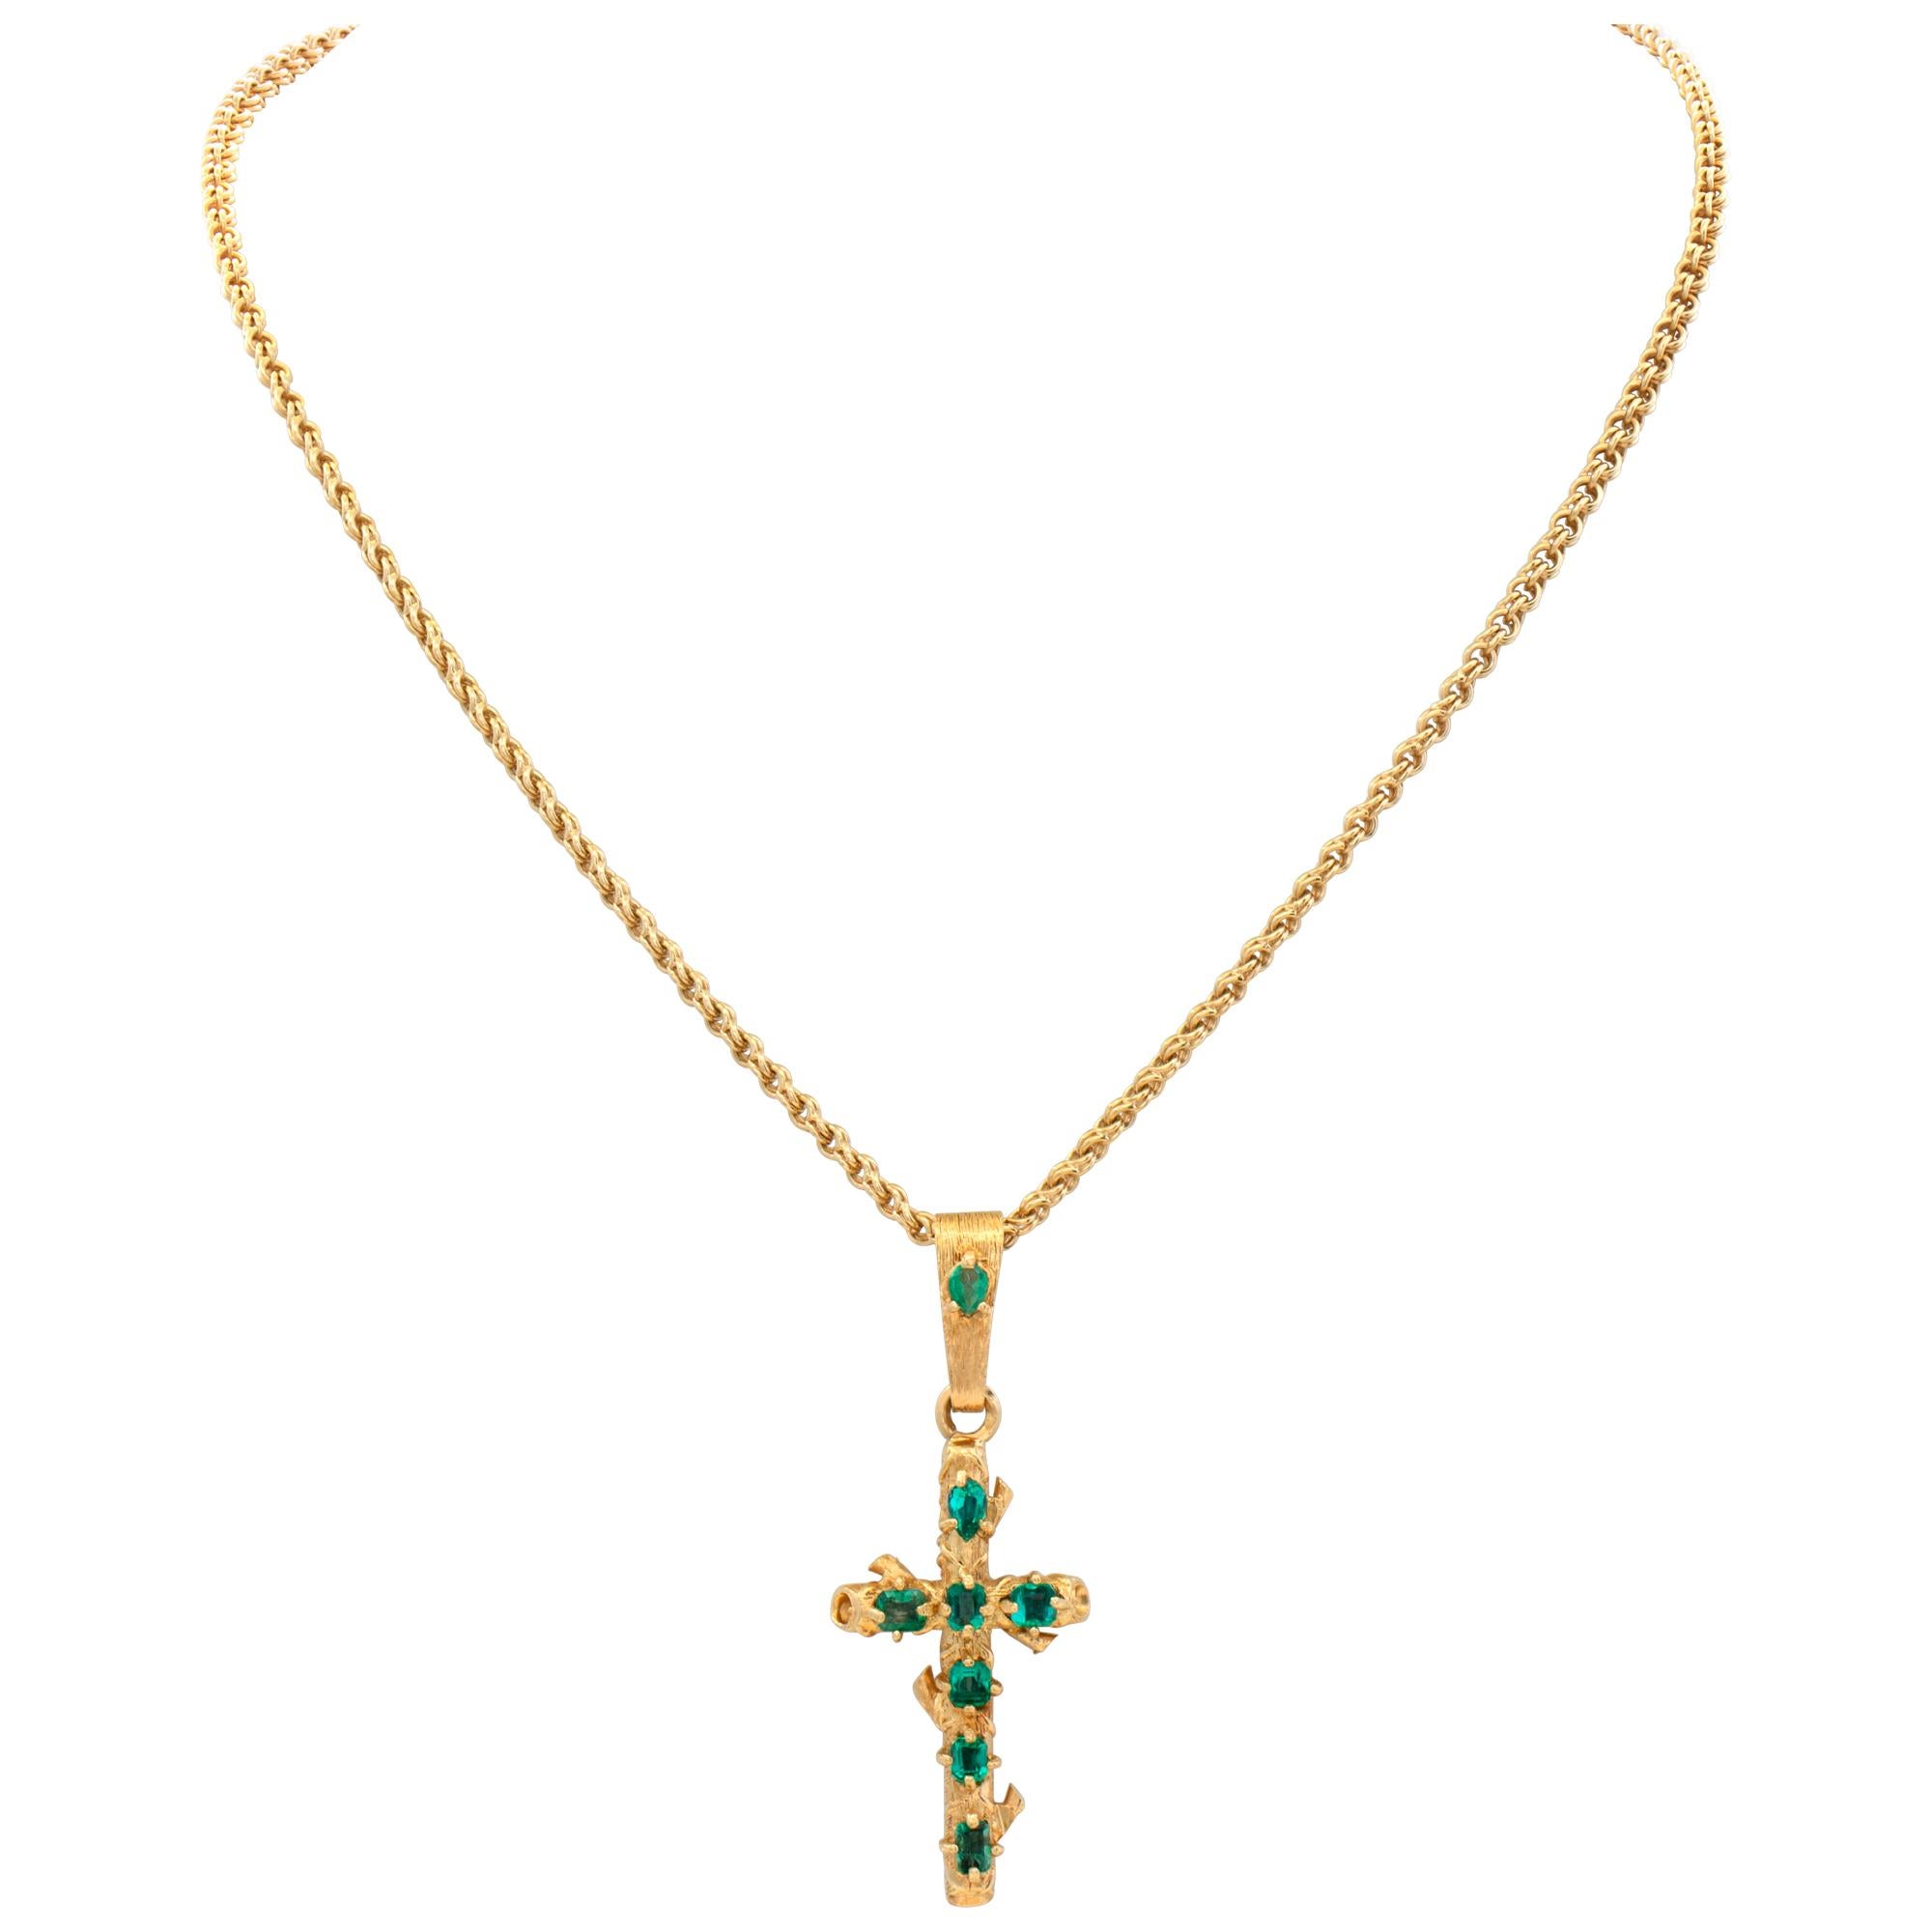 Unique 18k yellow gold chain with 18k yellow gold cross pendant with approximately 2 carats in emeralds. Cross length 1.5